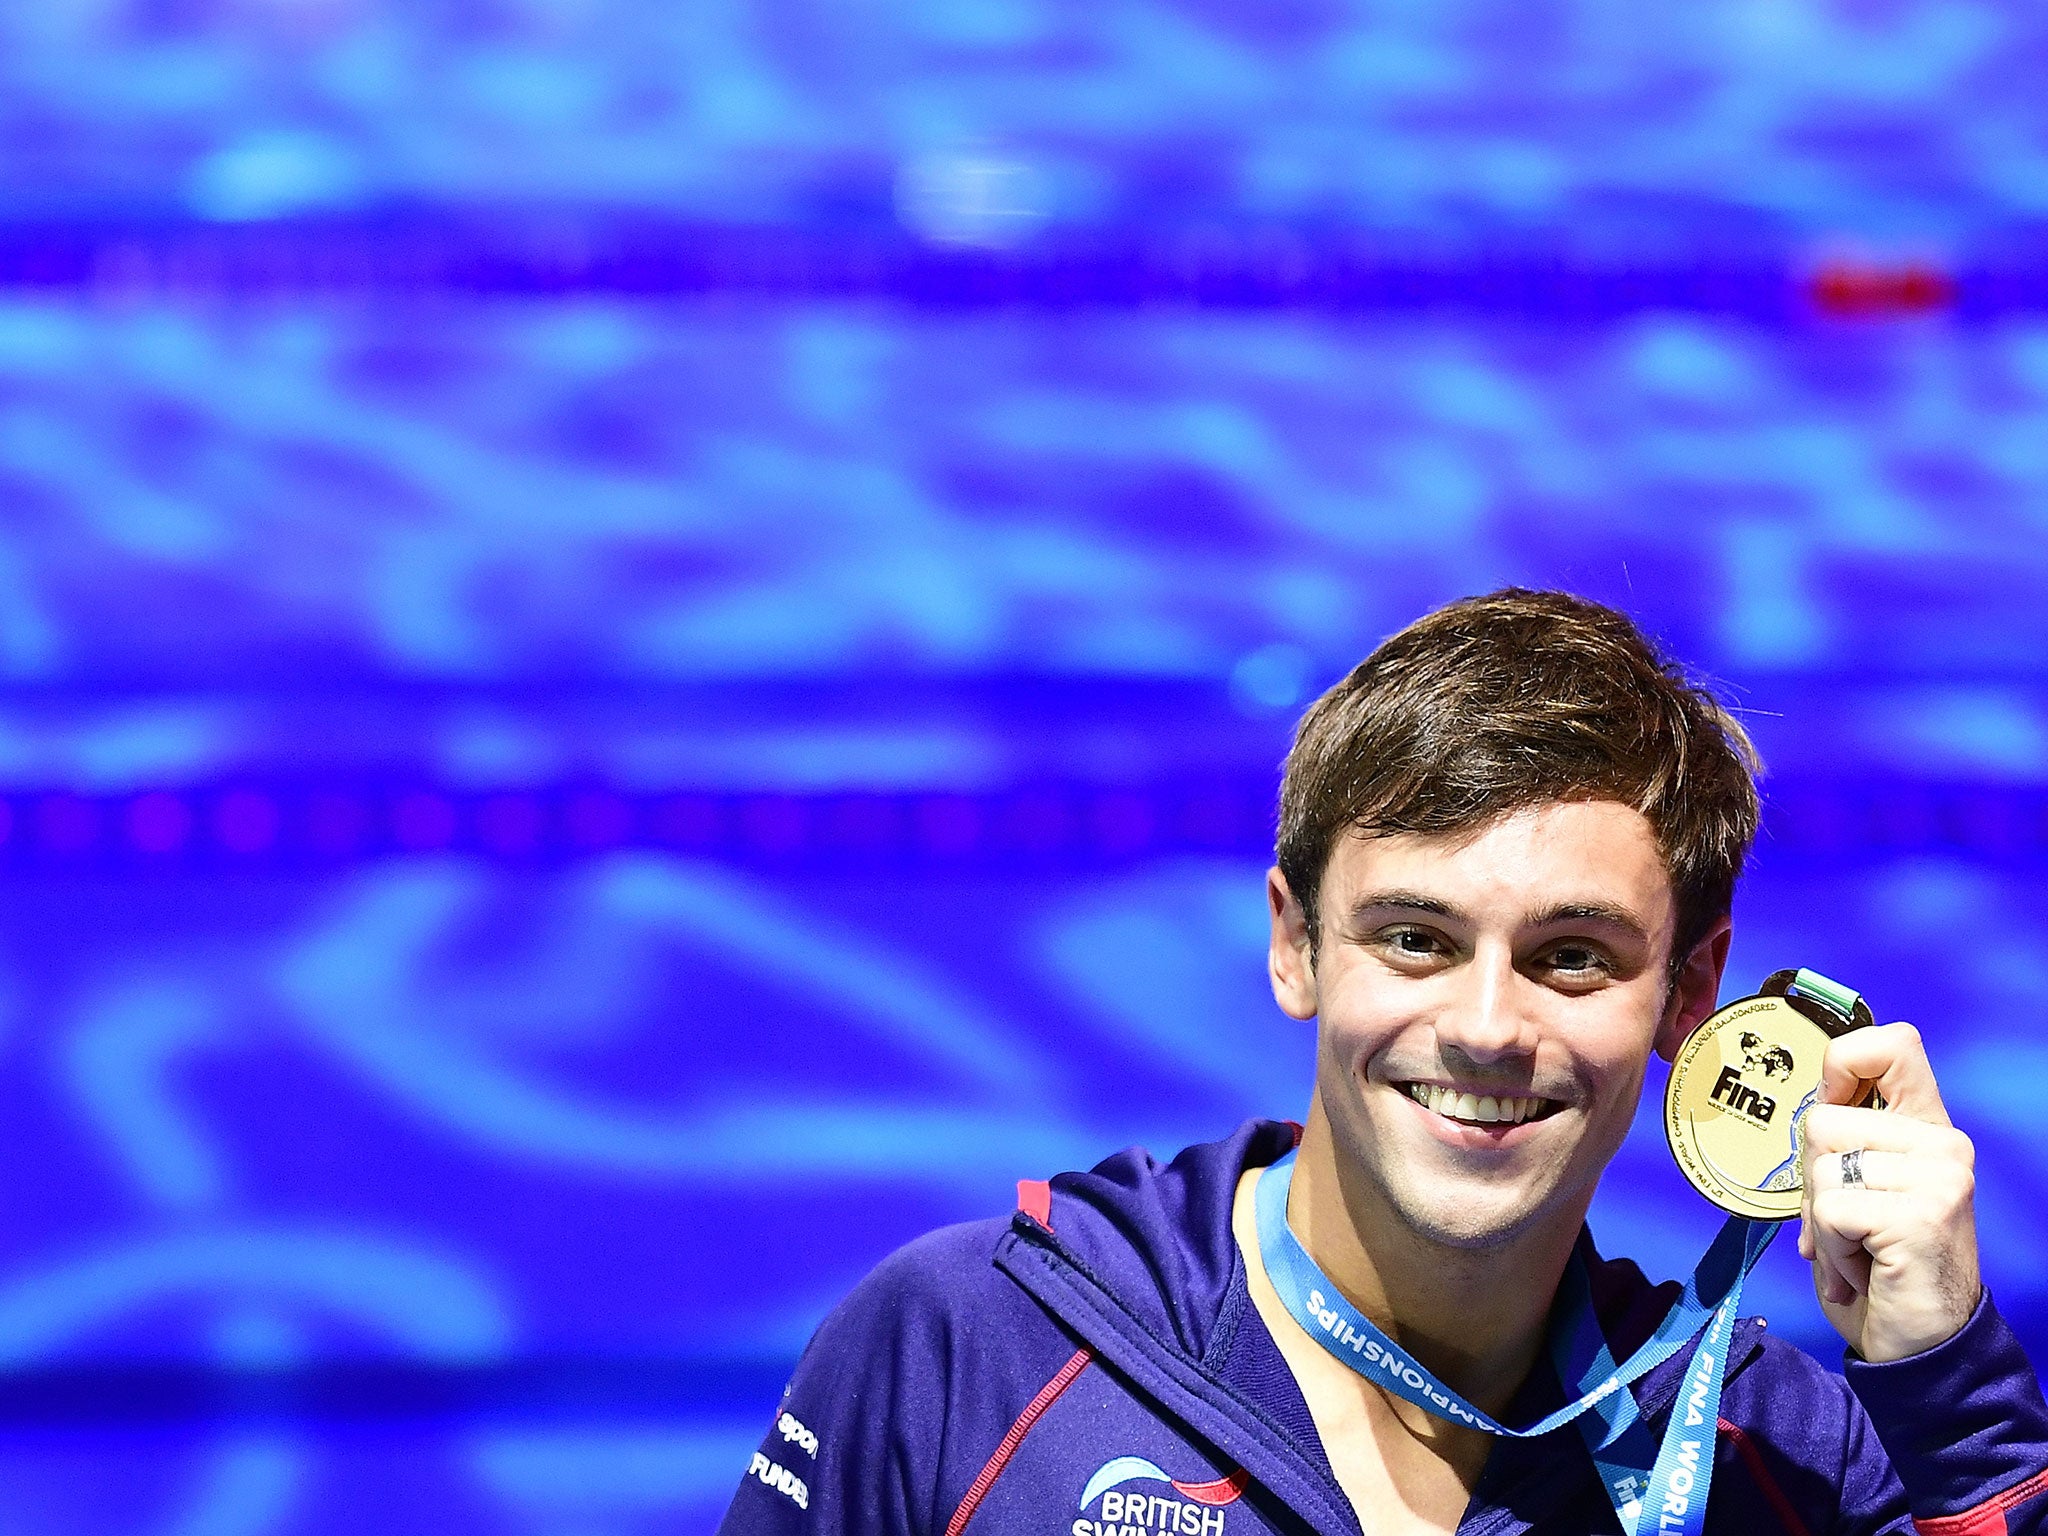 Tom Daley with his gold medal in Budapest